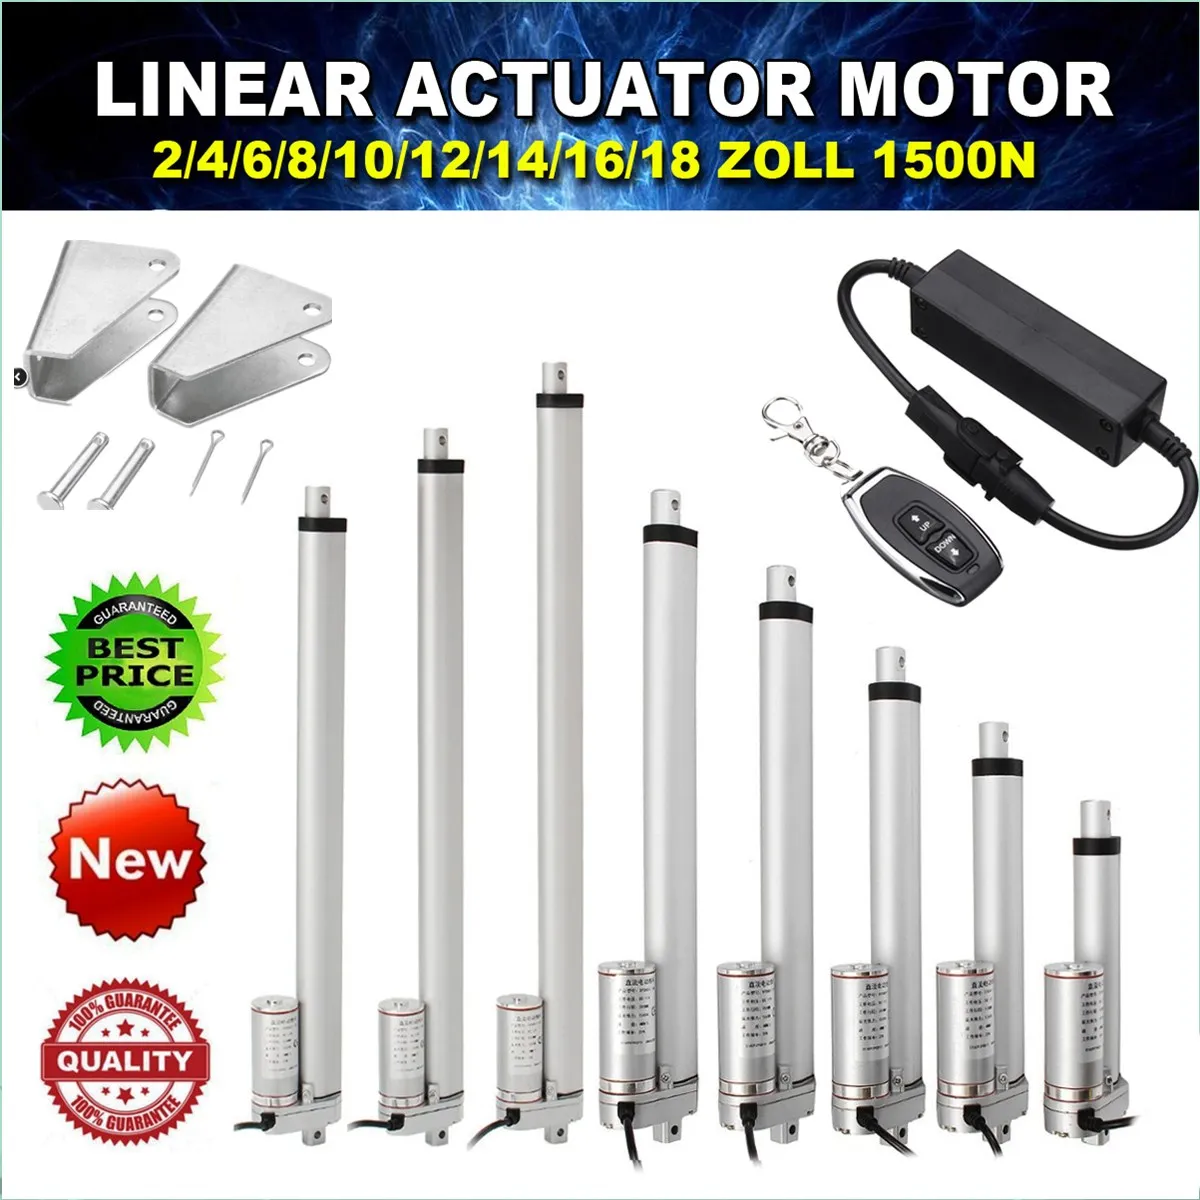 Details about   2x 10" 1500N Linear Actuator 12V Motor Multi-function for Industy Window Medical 